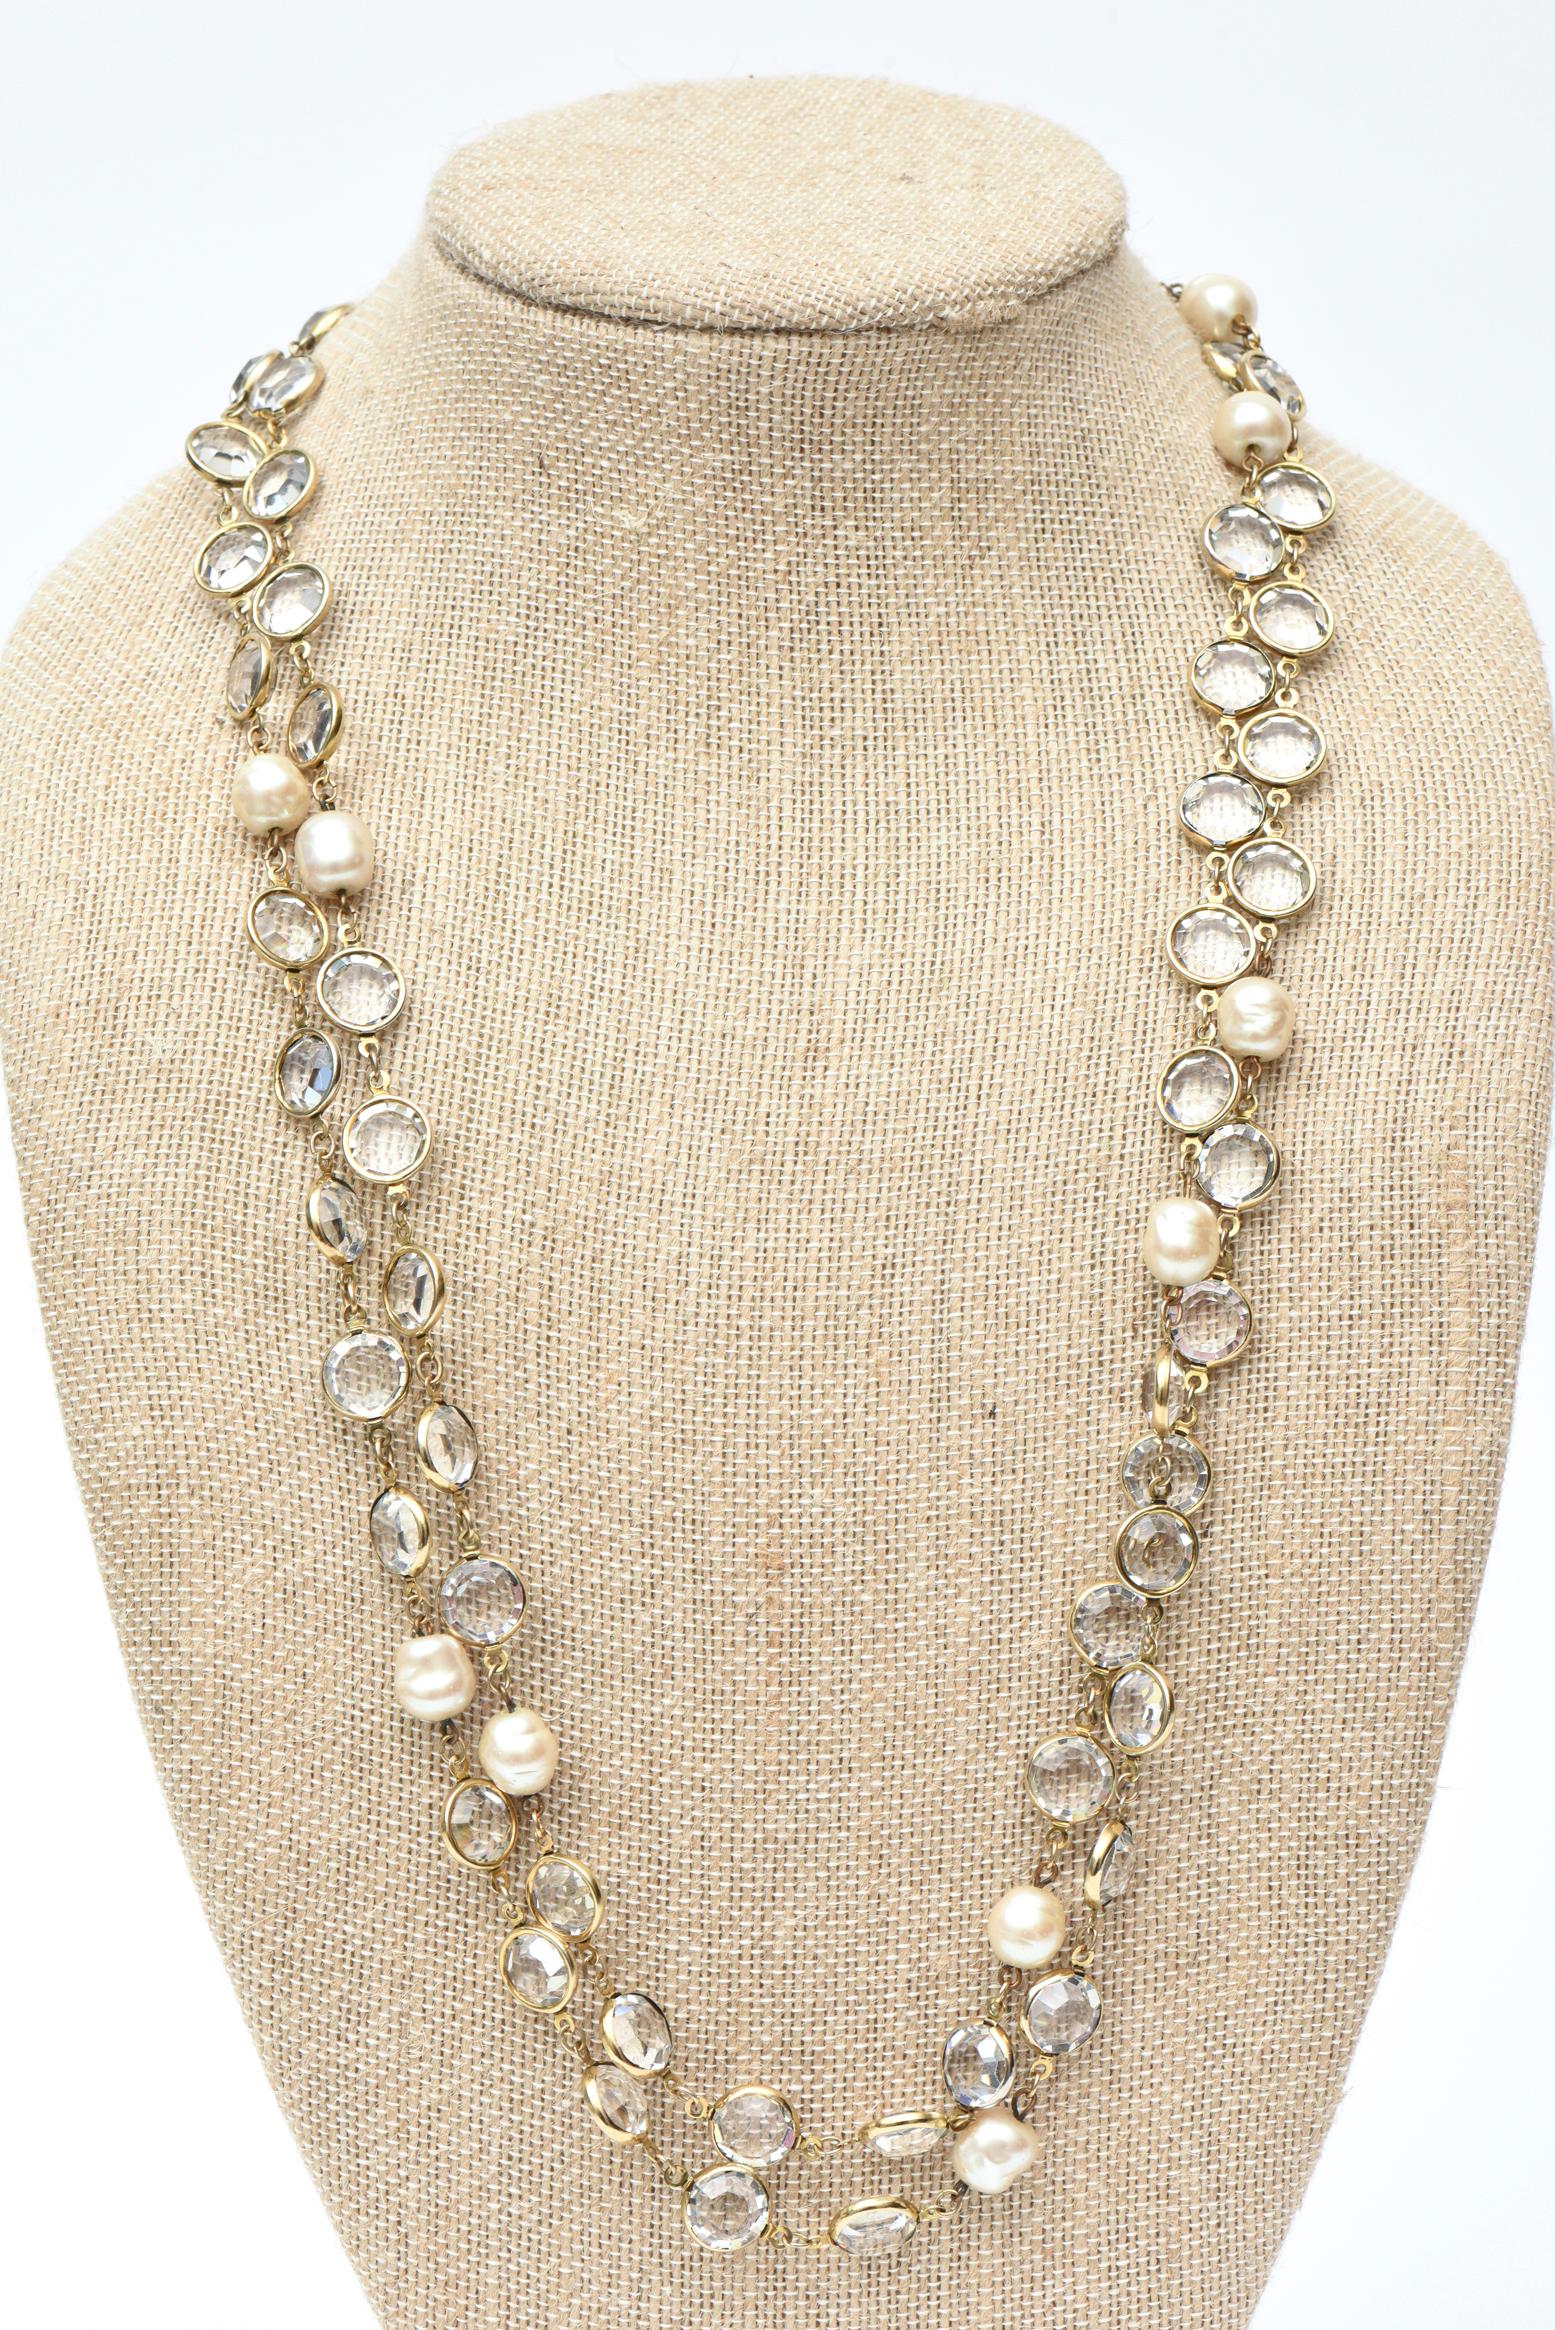 Antique Cushion Cut Chanel Vintage Faux Pearl and Bevel Clear Crystal Wrap Necklace For Sale